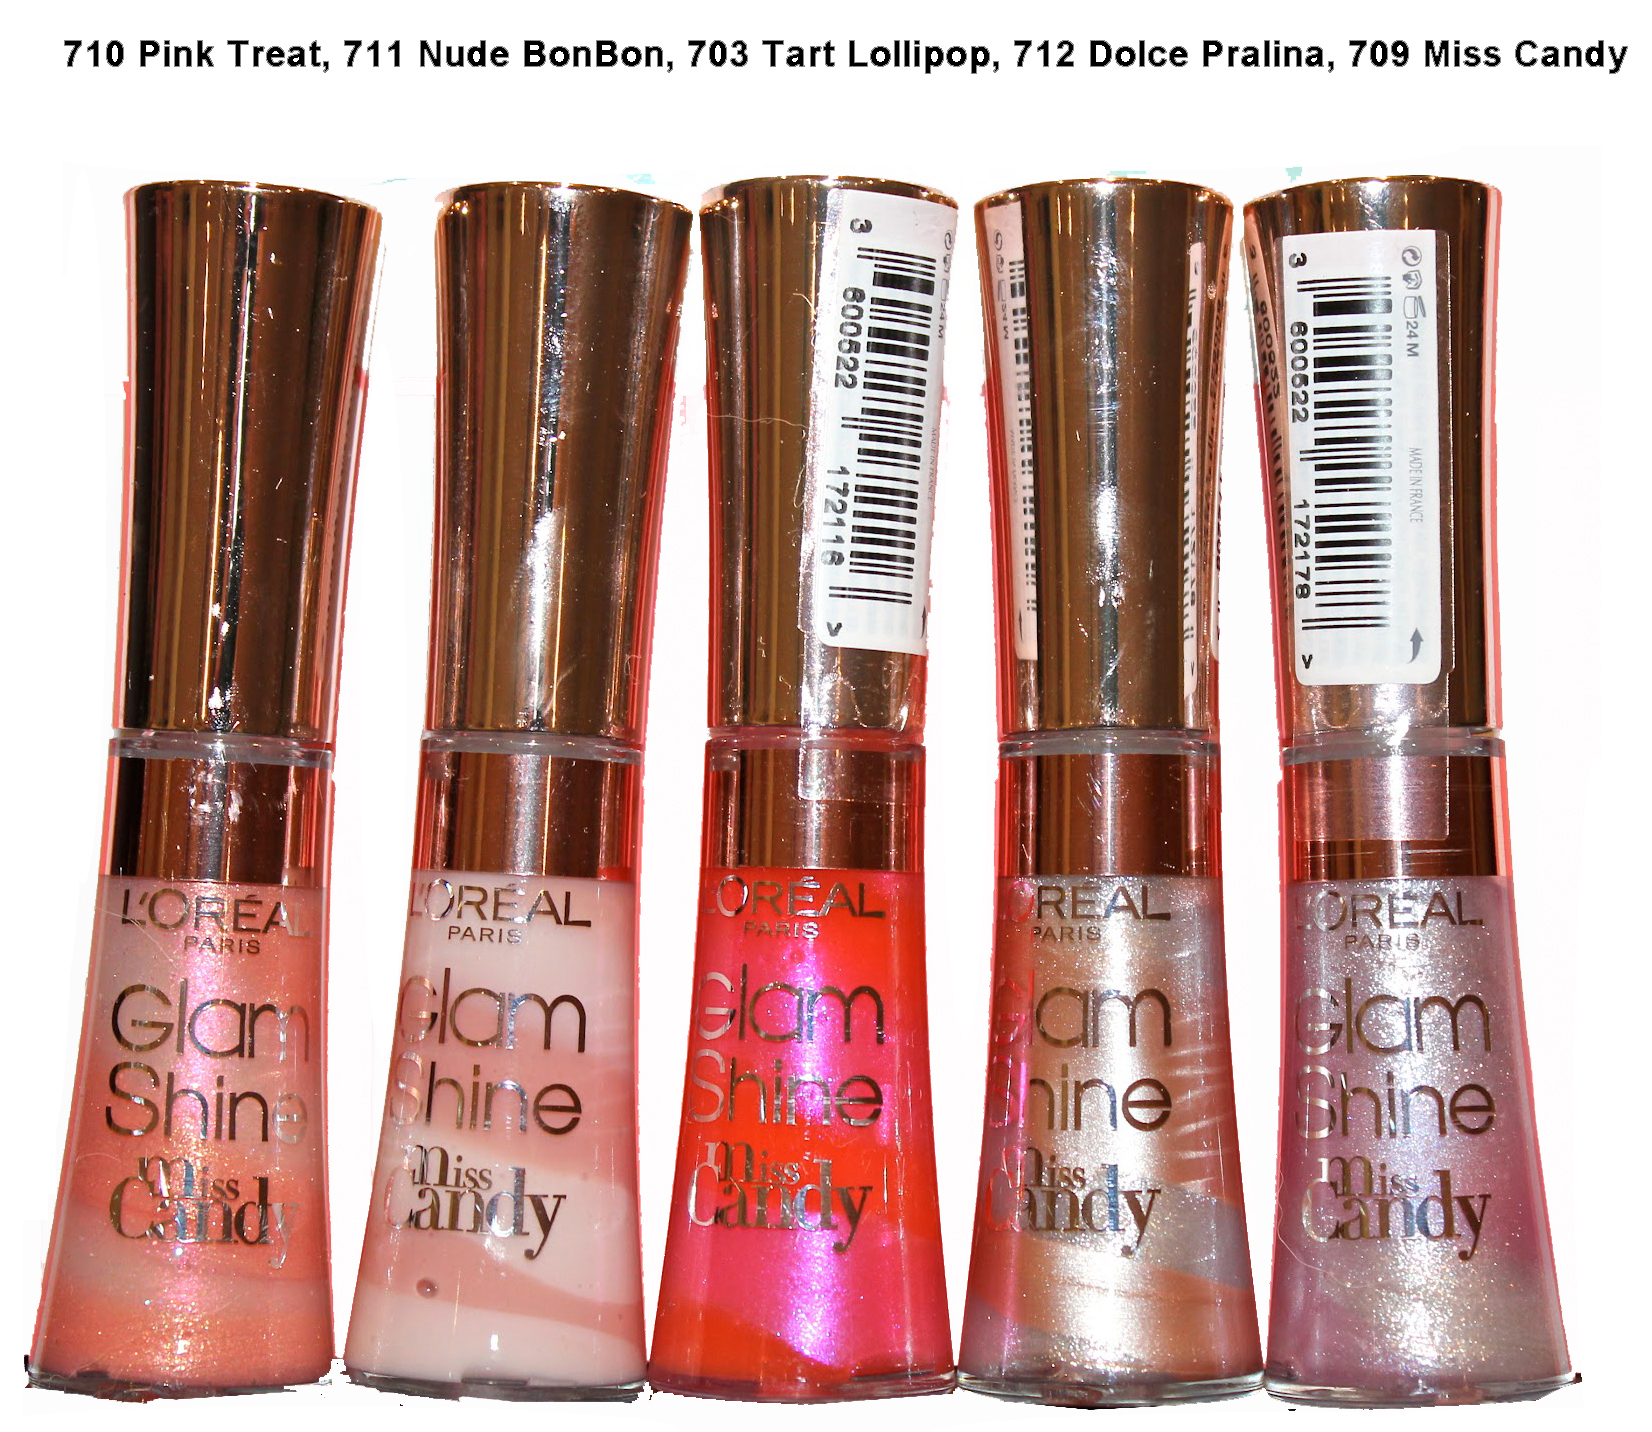 L Oréal Glam Shine Miss Candy Lip Gloss Reflexion - 712 Dolce Parlina